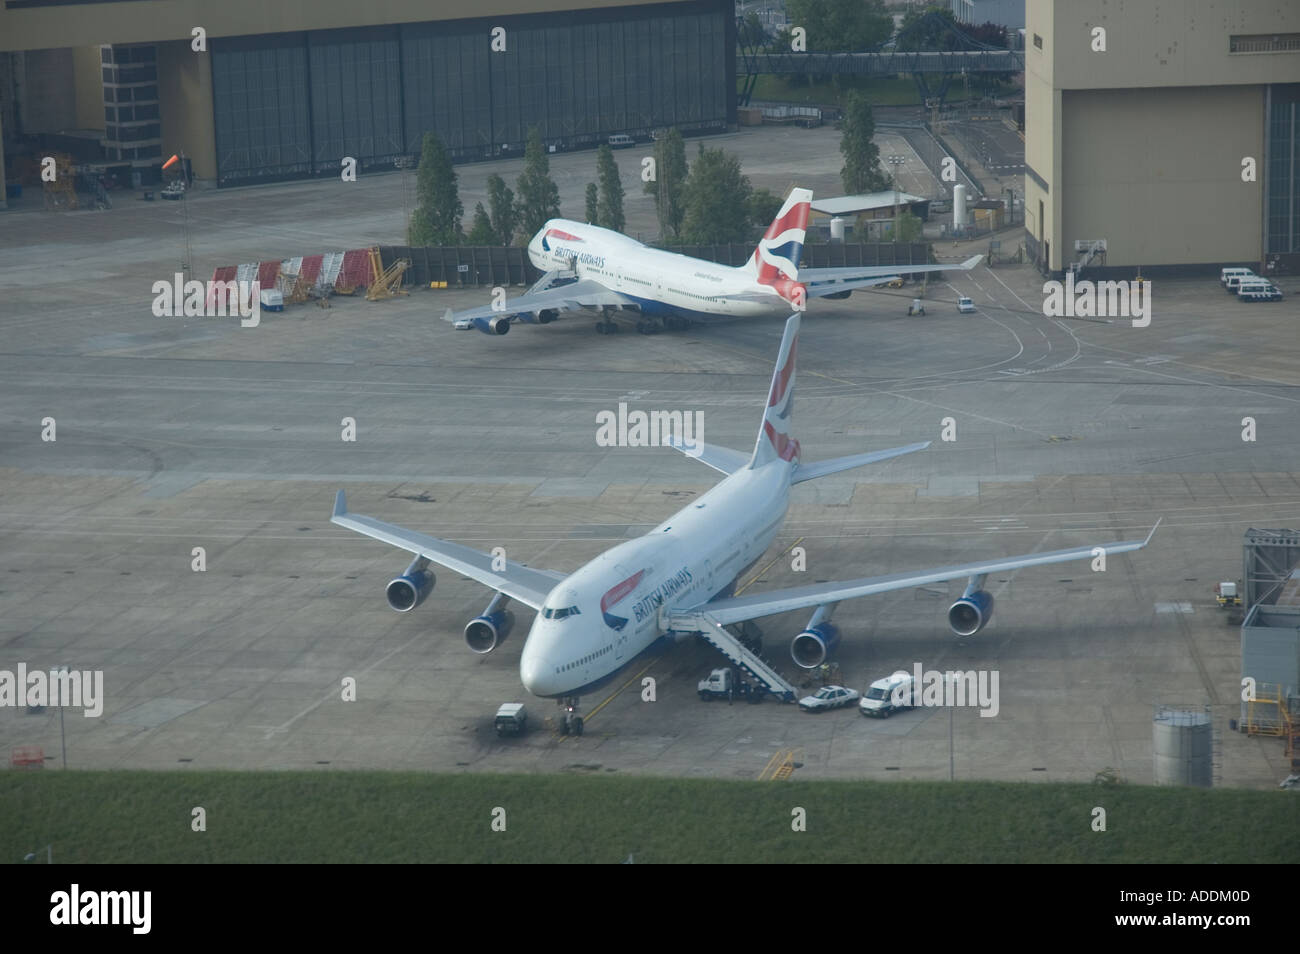 Two British Airways jets parked at Heathrow International Airport in London Stock Photo